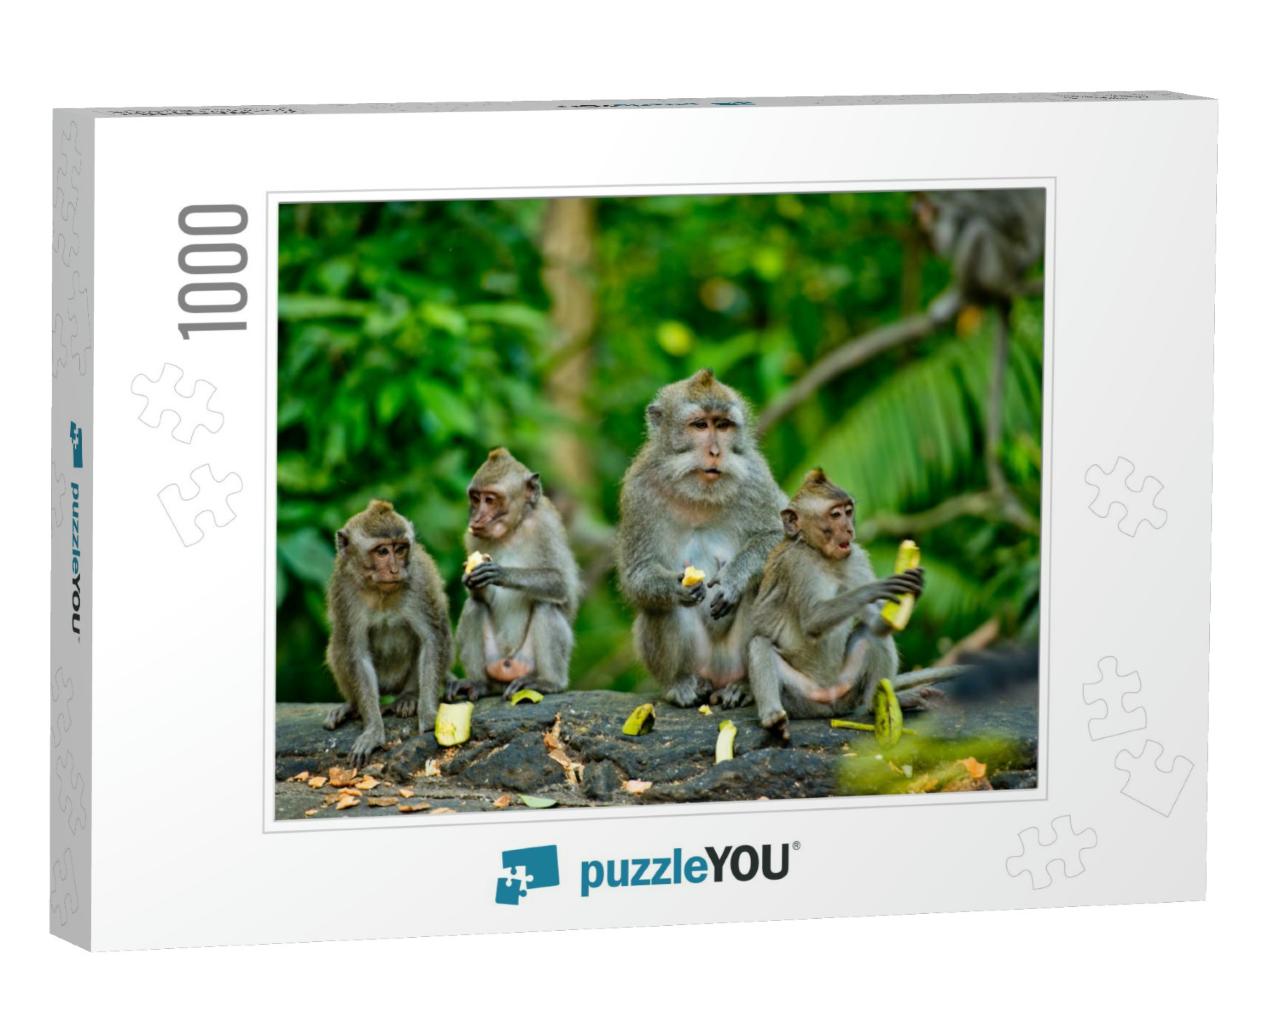 Adult Monkeys Sits & Eating Banana Fruit in the Forest. M... Jigsaw Puzzle with 1000 pieces